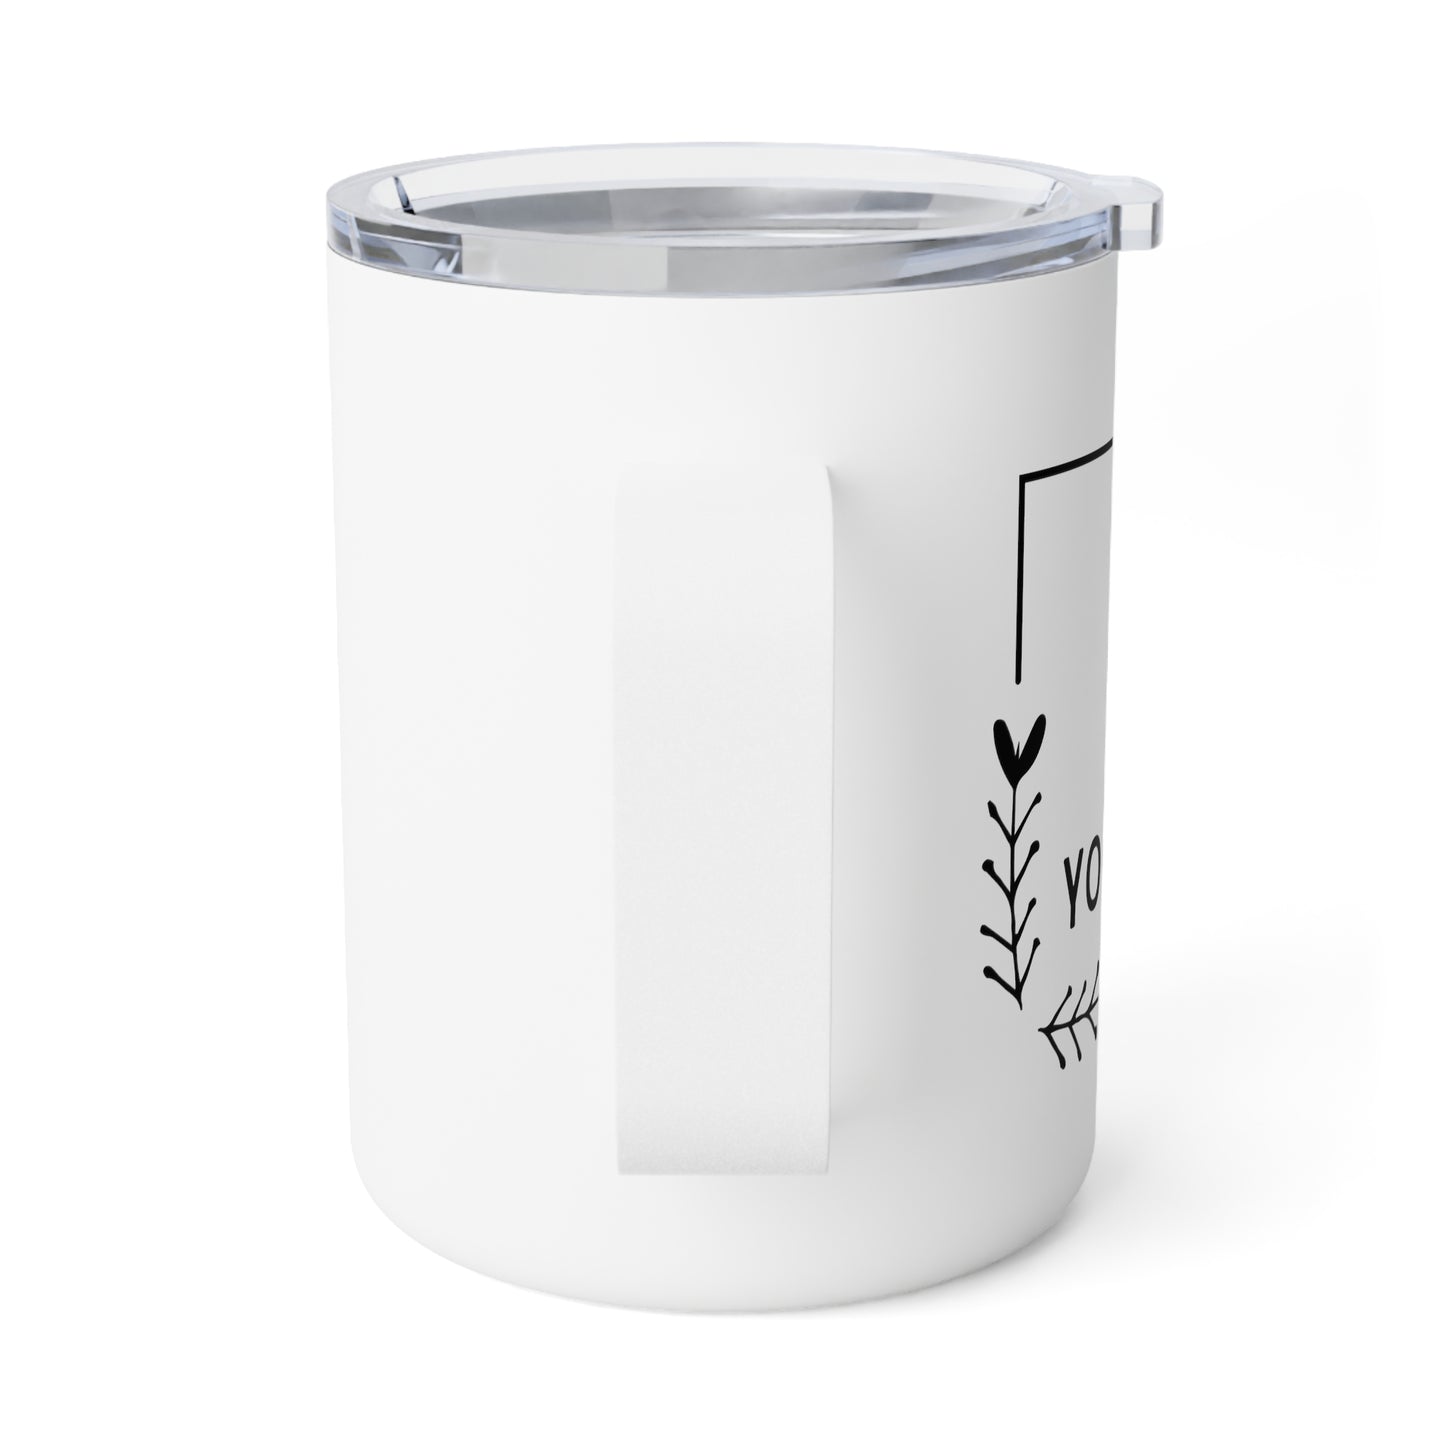 You Are A Bass Ass Yoga Instructor Stainless Steel Mug